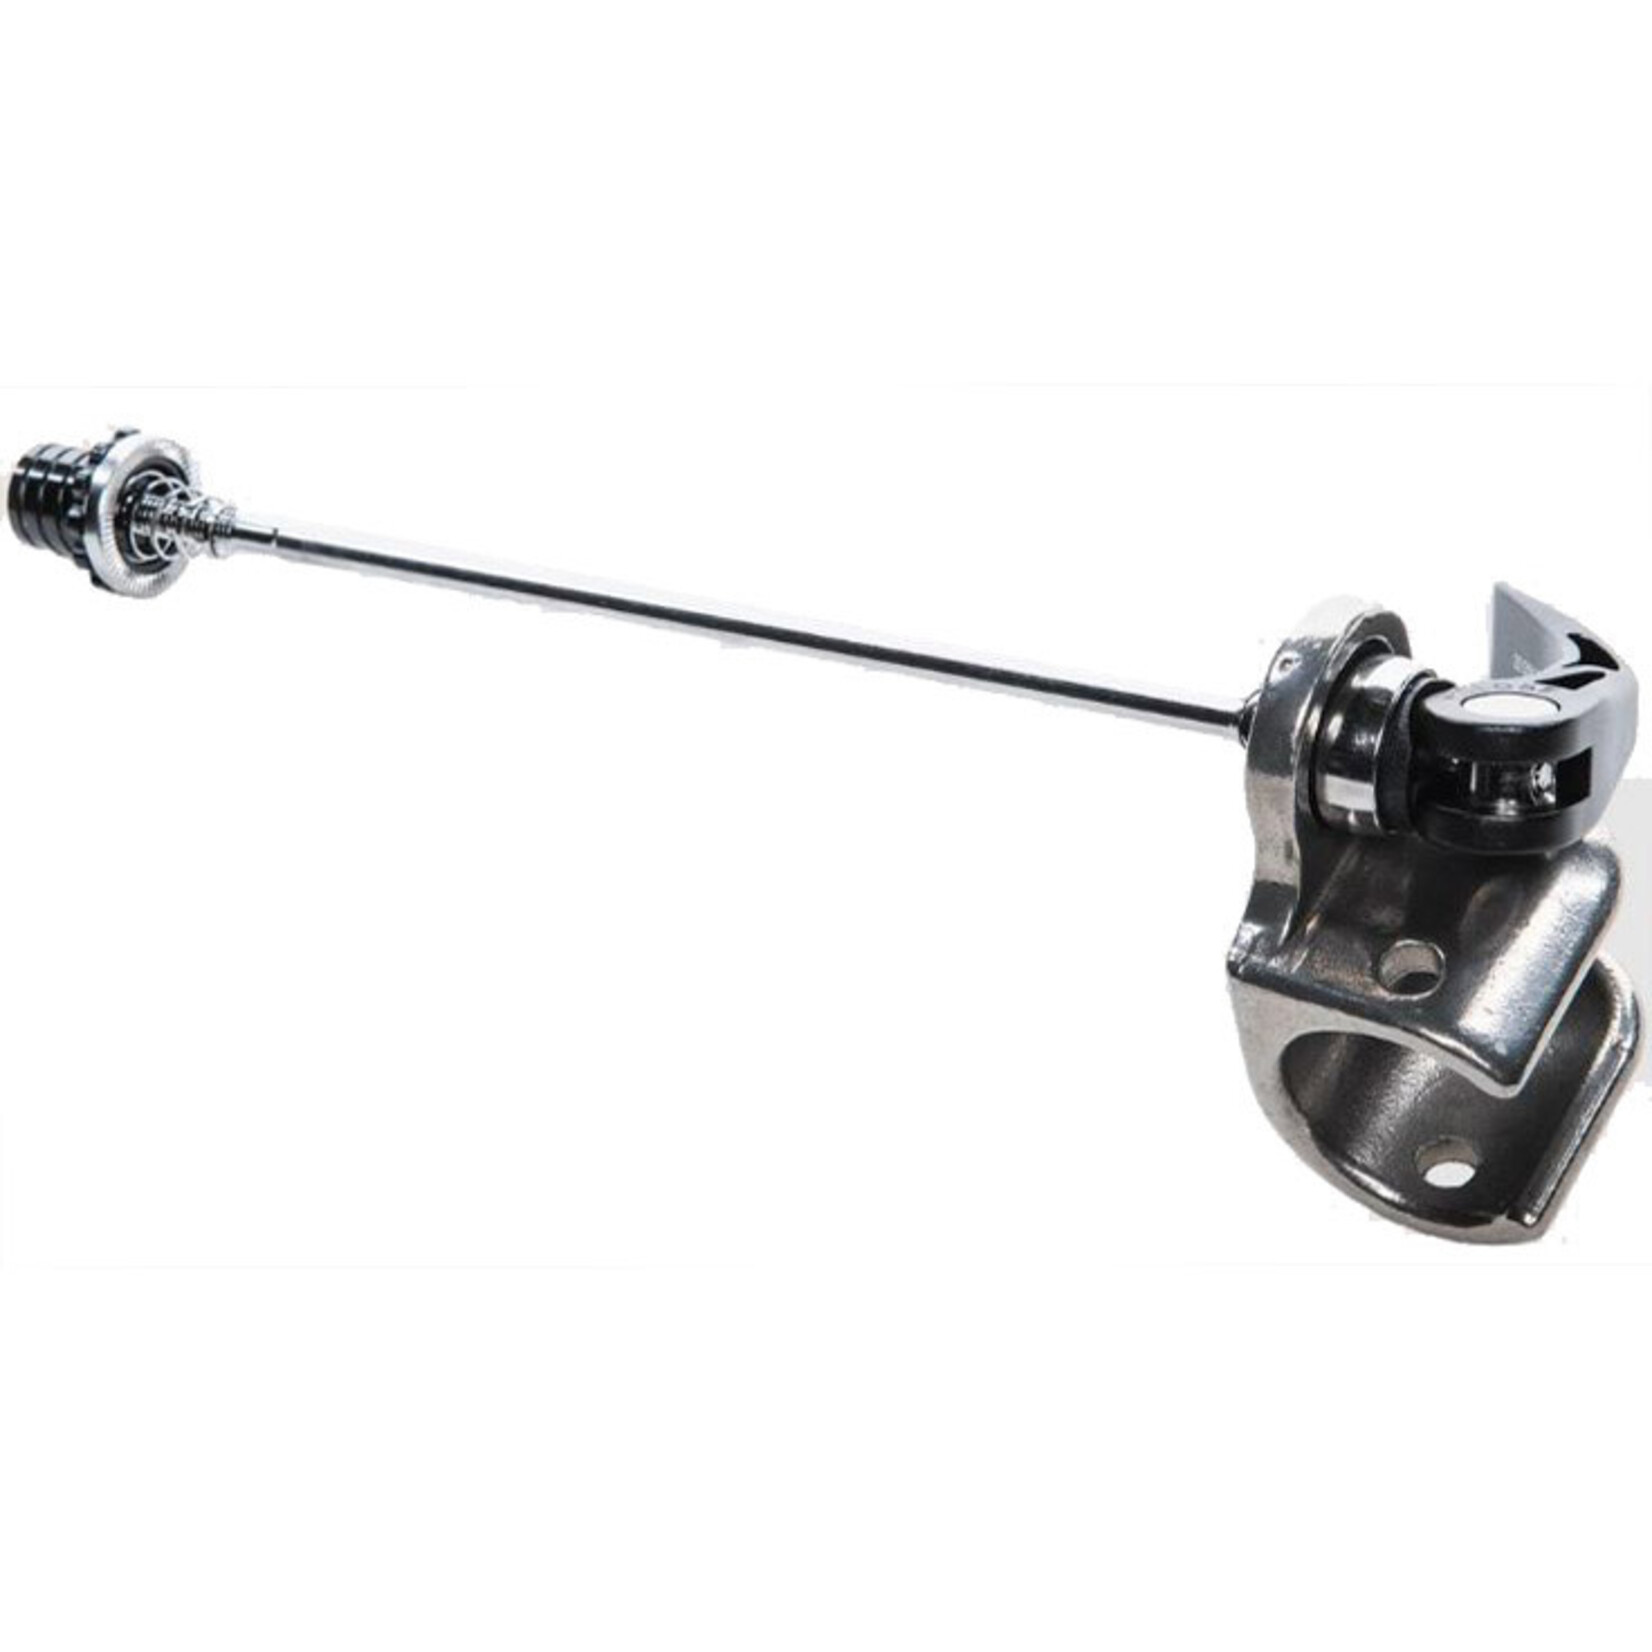 THULE Thule Axle Mount ezHitch Cup with Q/R Skewer